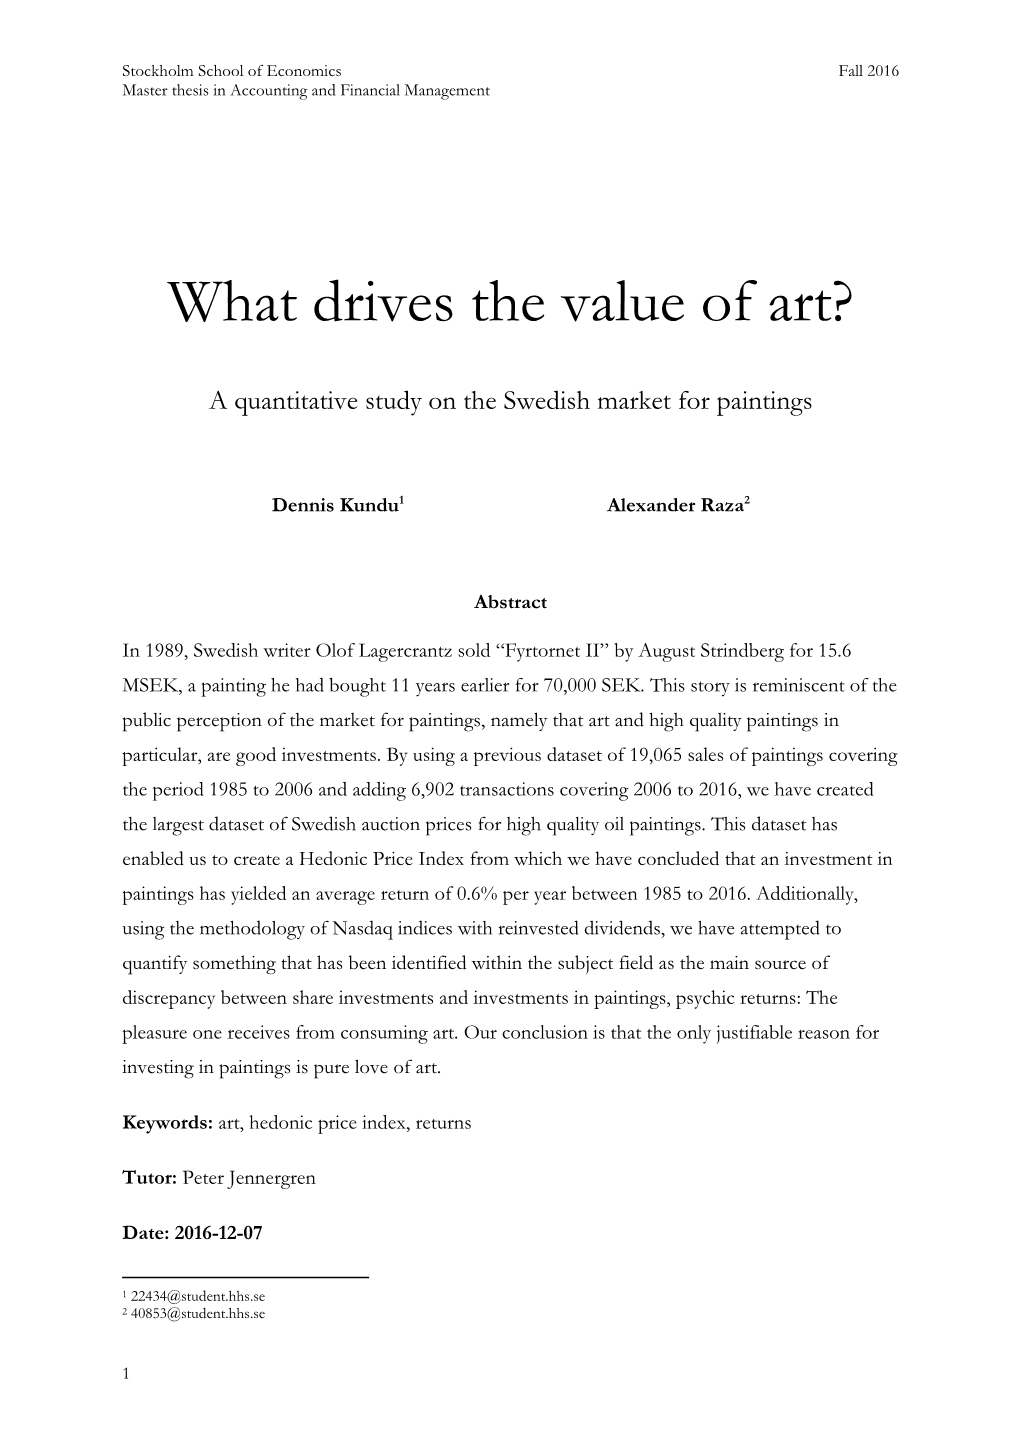 What Drives the Value of Art?